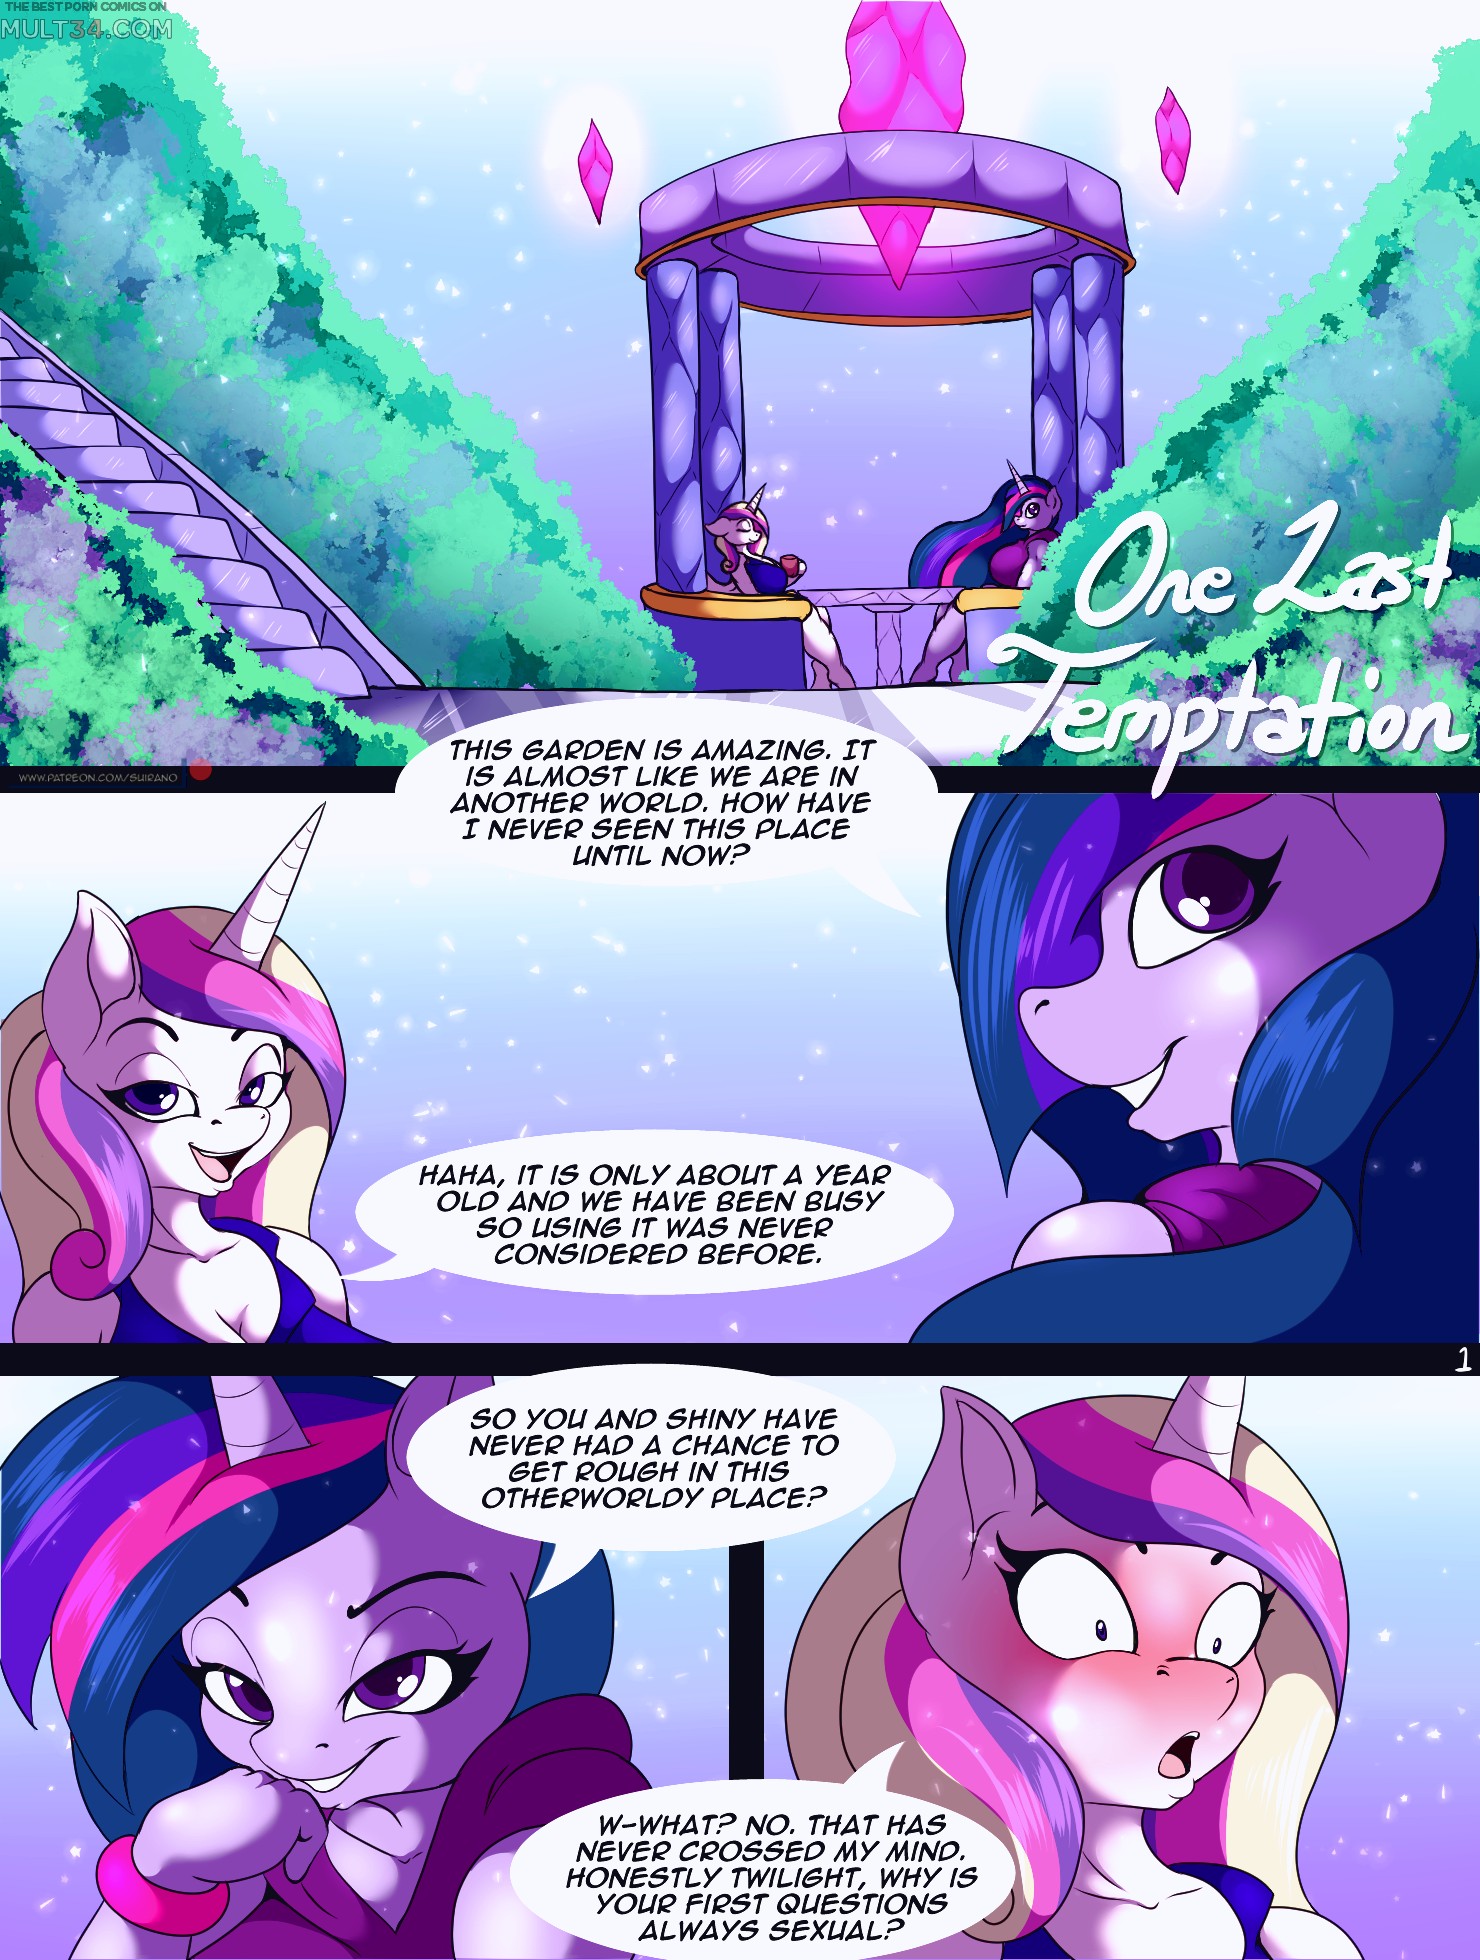 One Last Temptation porn comic page 1 on category My Little Pony